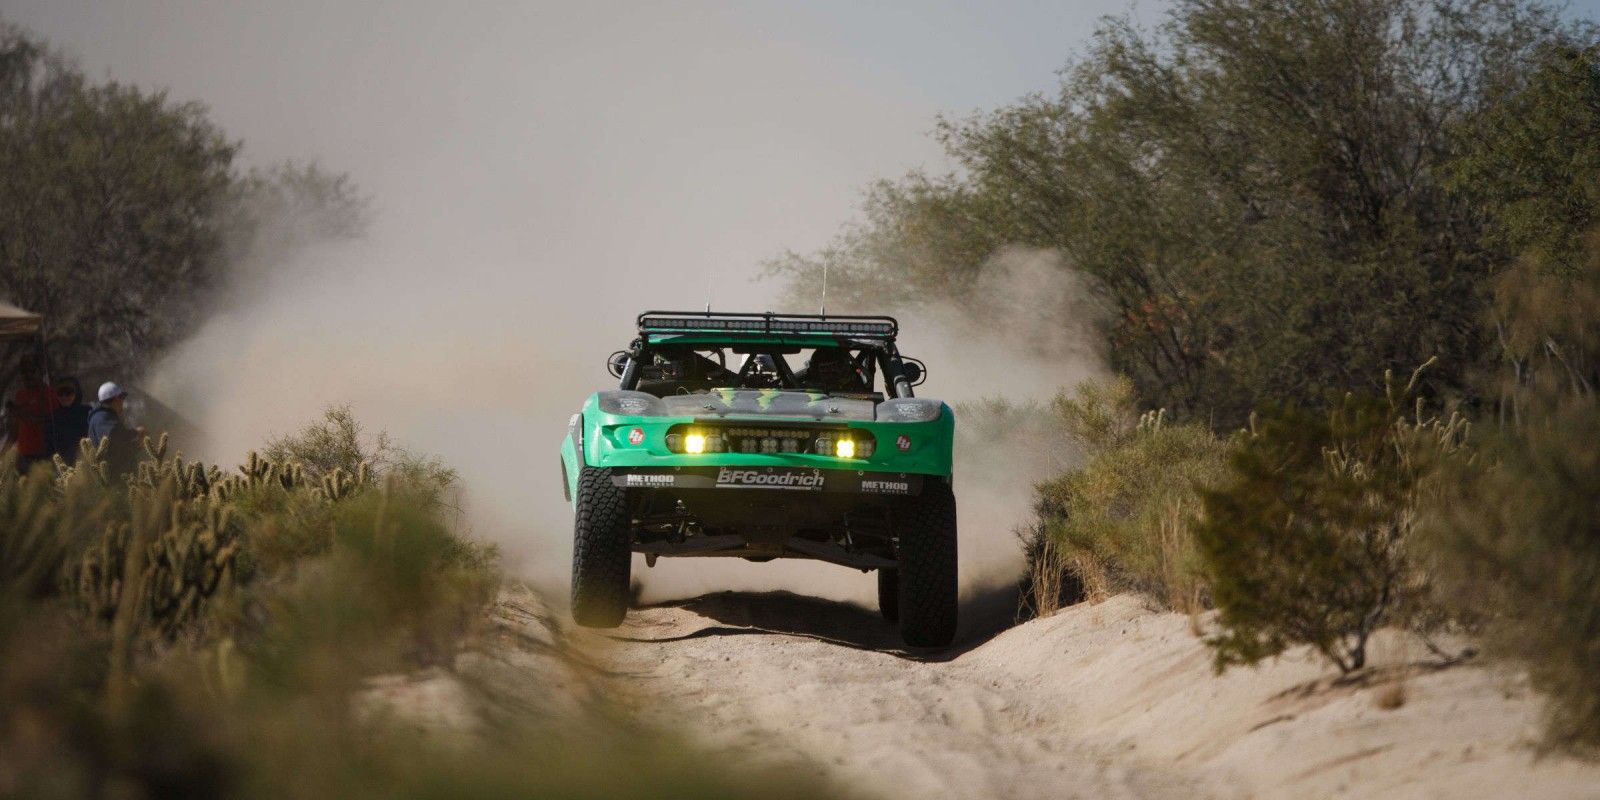 Cameron Steele Puts Monster Energy on Top at the Baja 1000